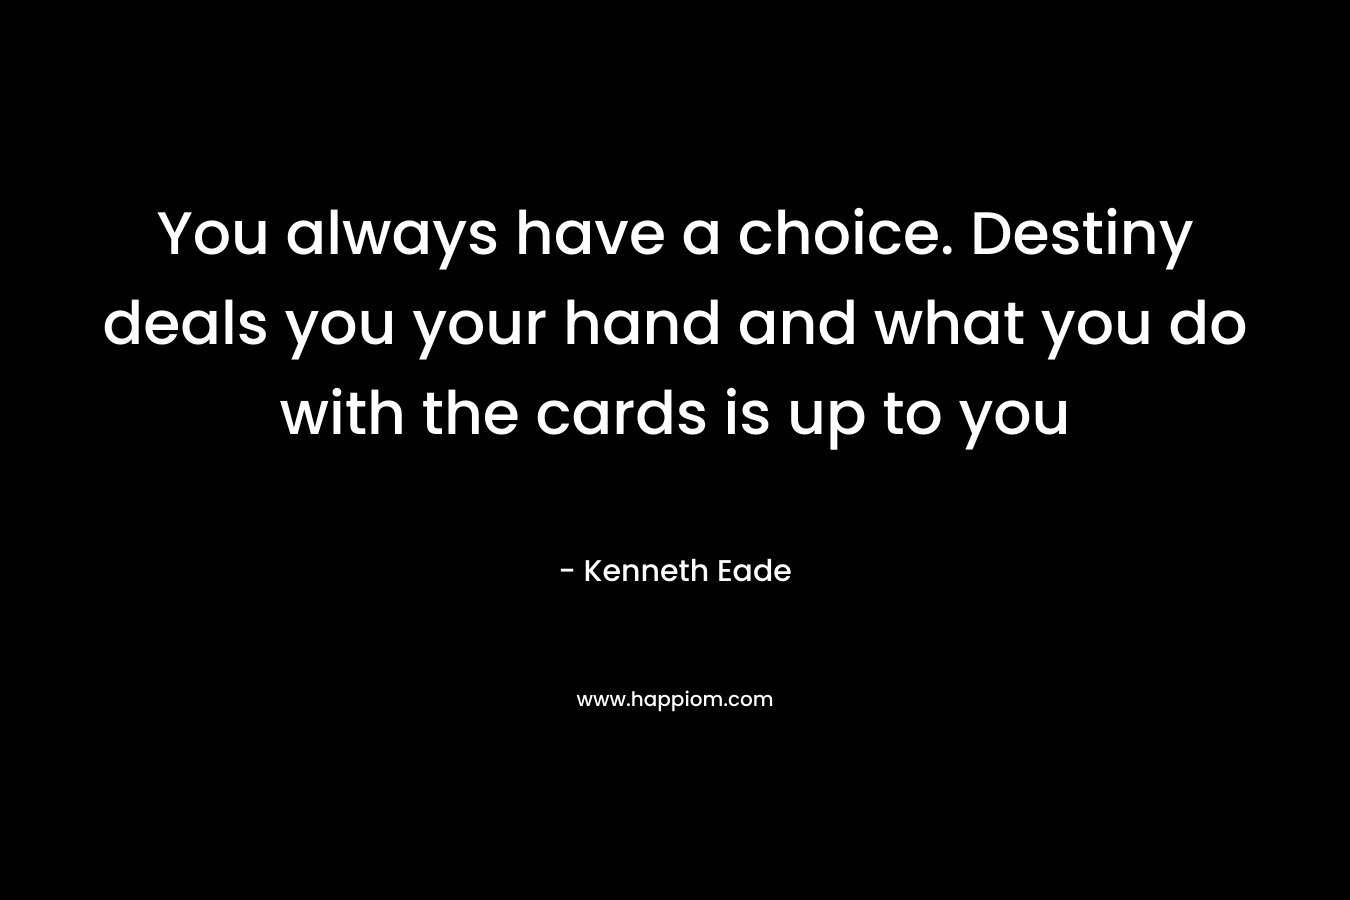 You always have a choice. Destiny deals you your hand and what you do with the cards is up to you